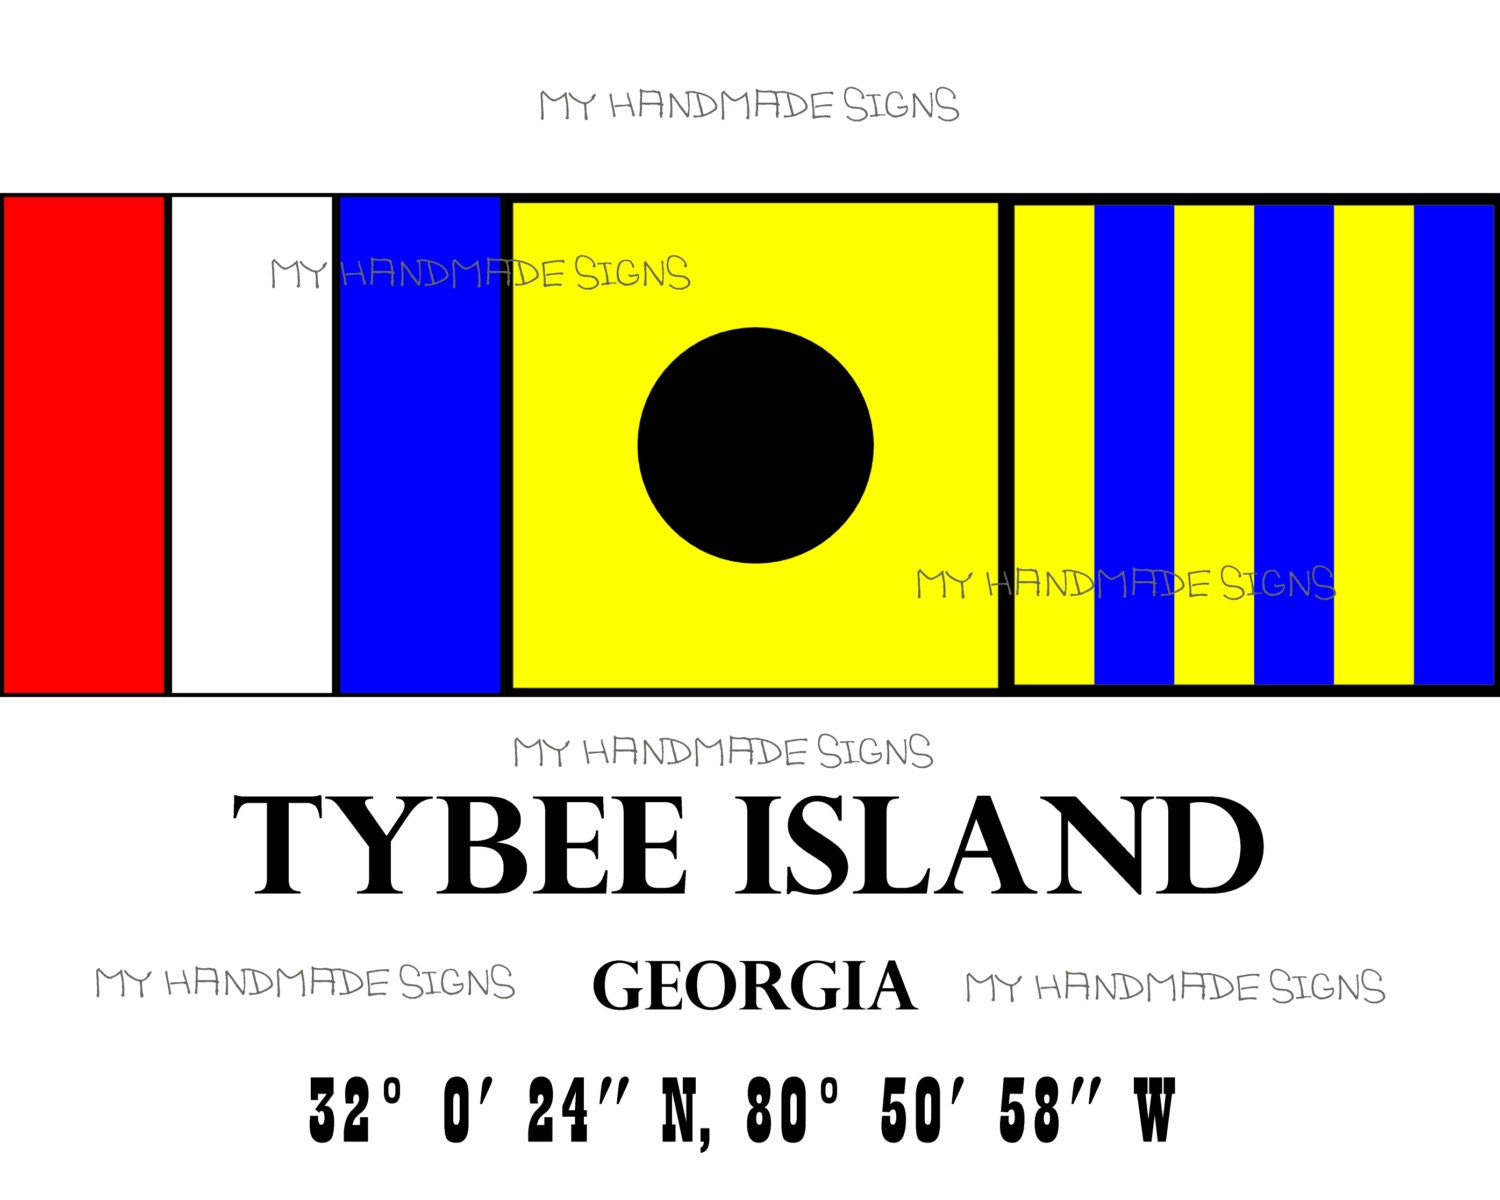 Tybee Island Nautical Flag Instant Download Art Print For 8 1/2" x 11" Paper Sized To 8" x 10" Sign Georgia